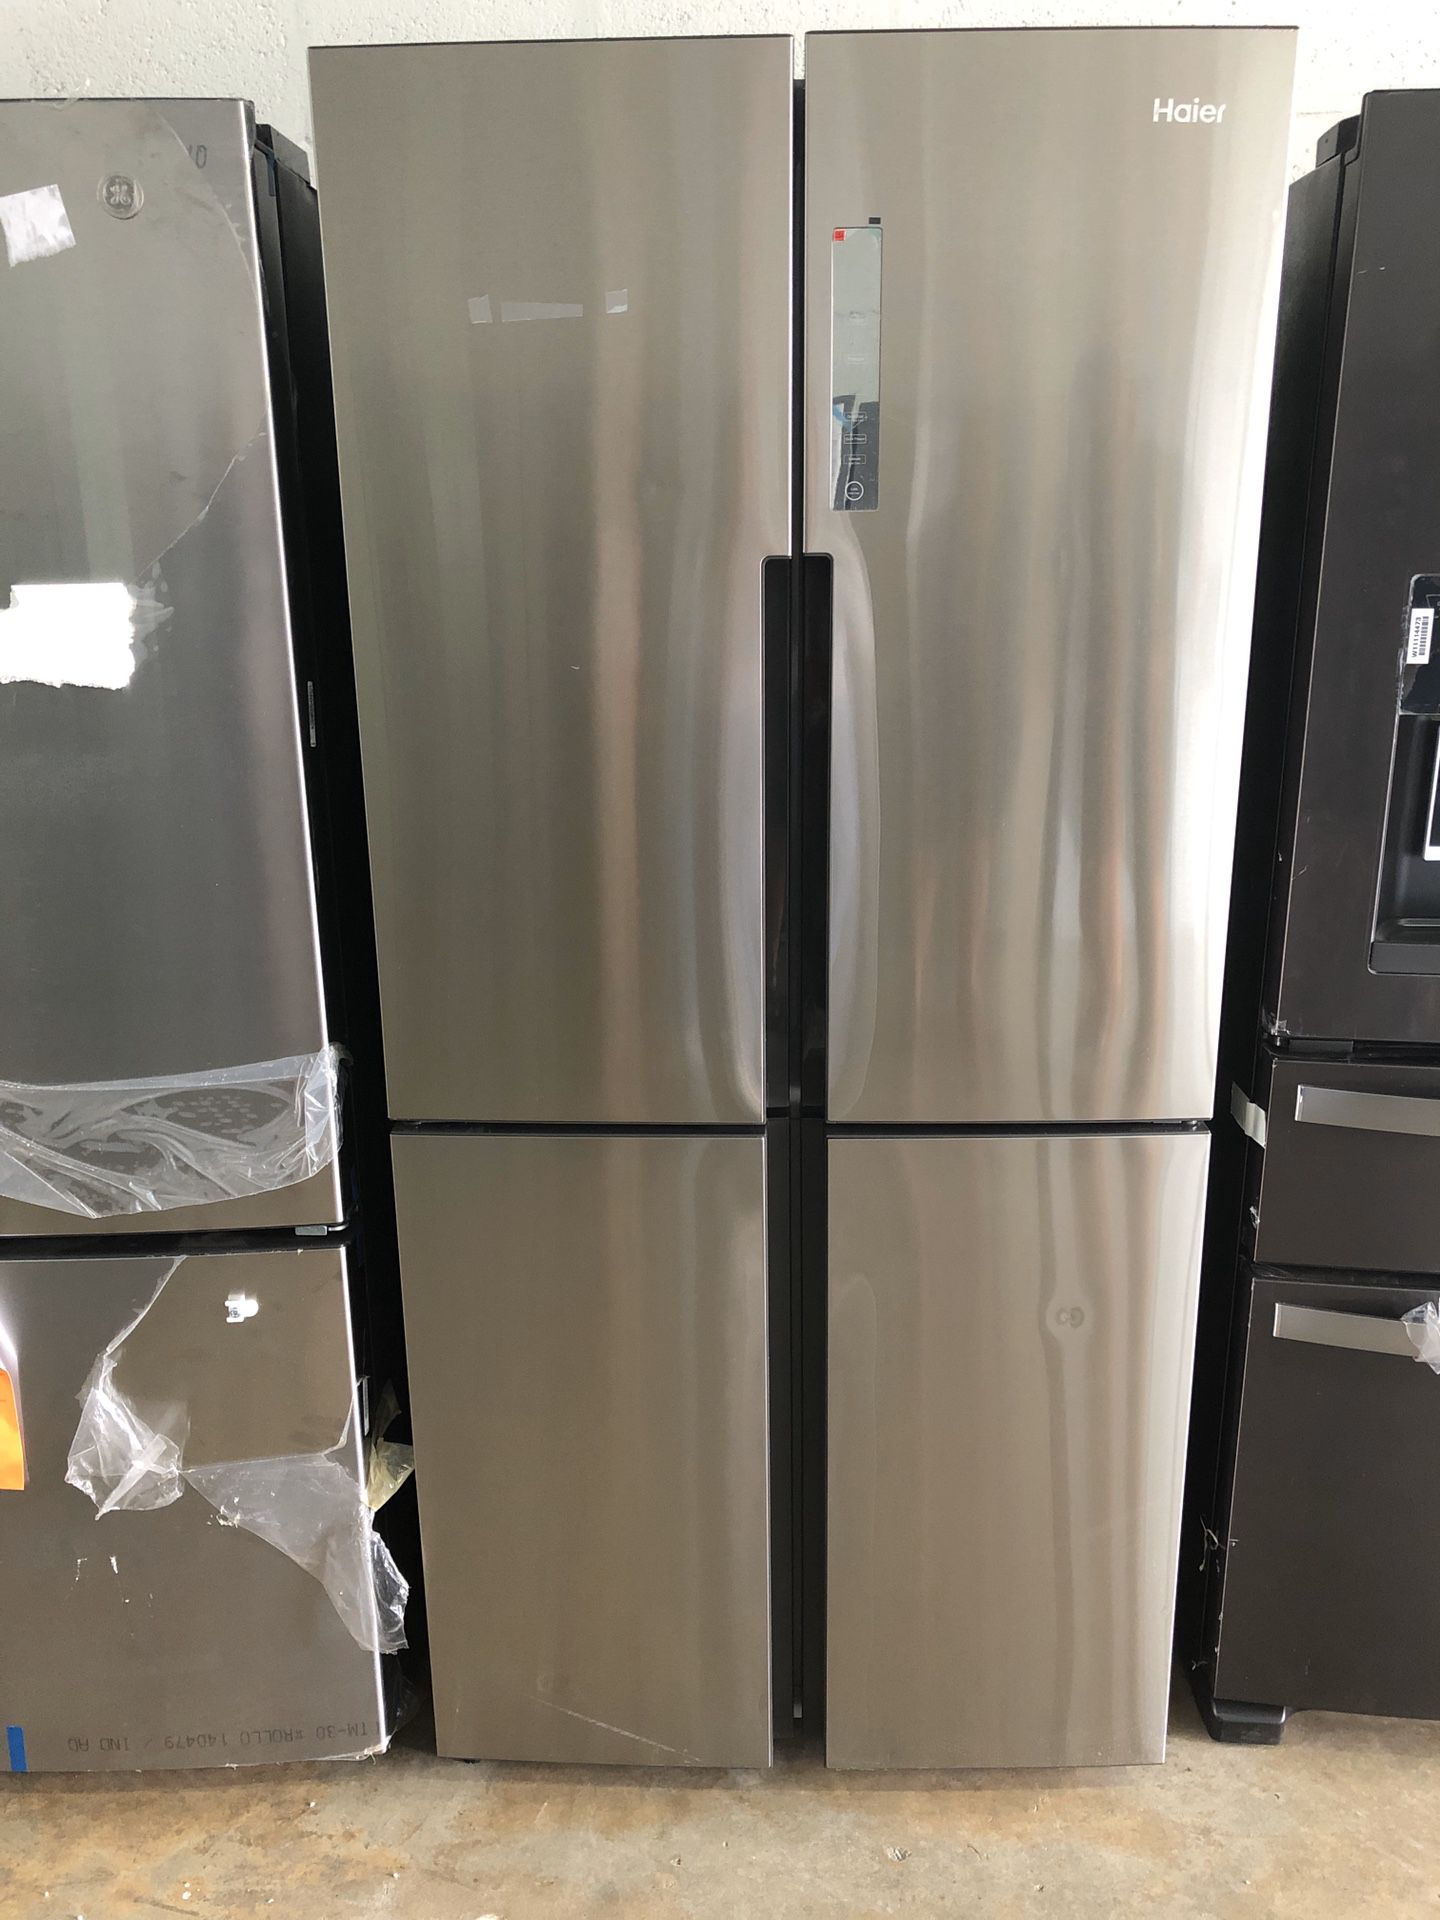 haier 33” NEW Haier 16.4 cu. ft. Quad French Door Freezer Refrigerator in Stainless Steel